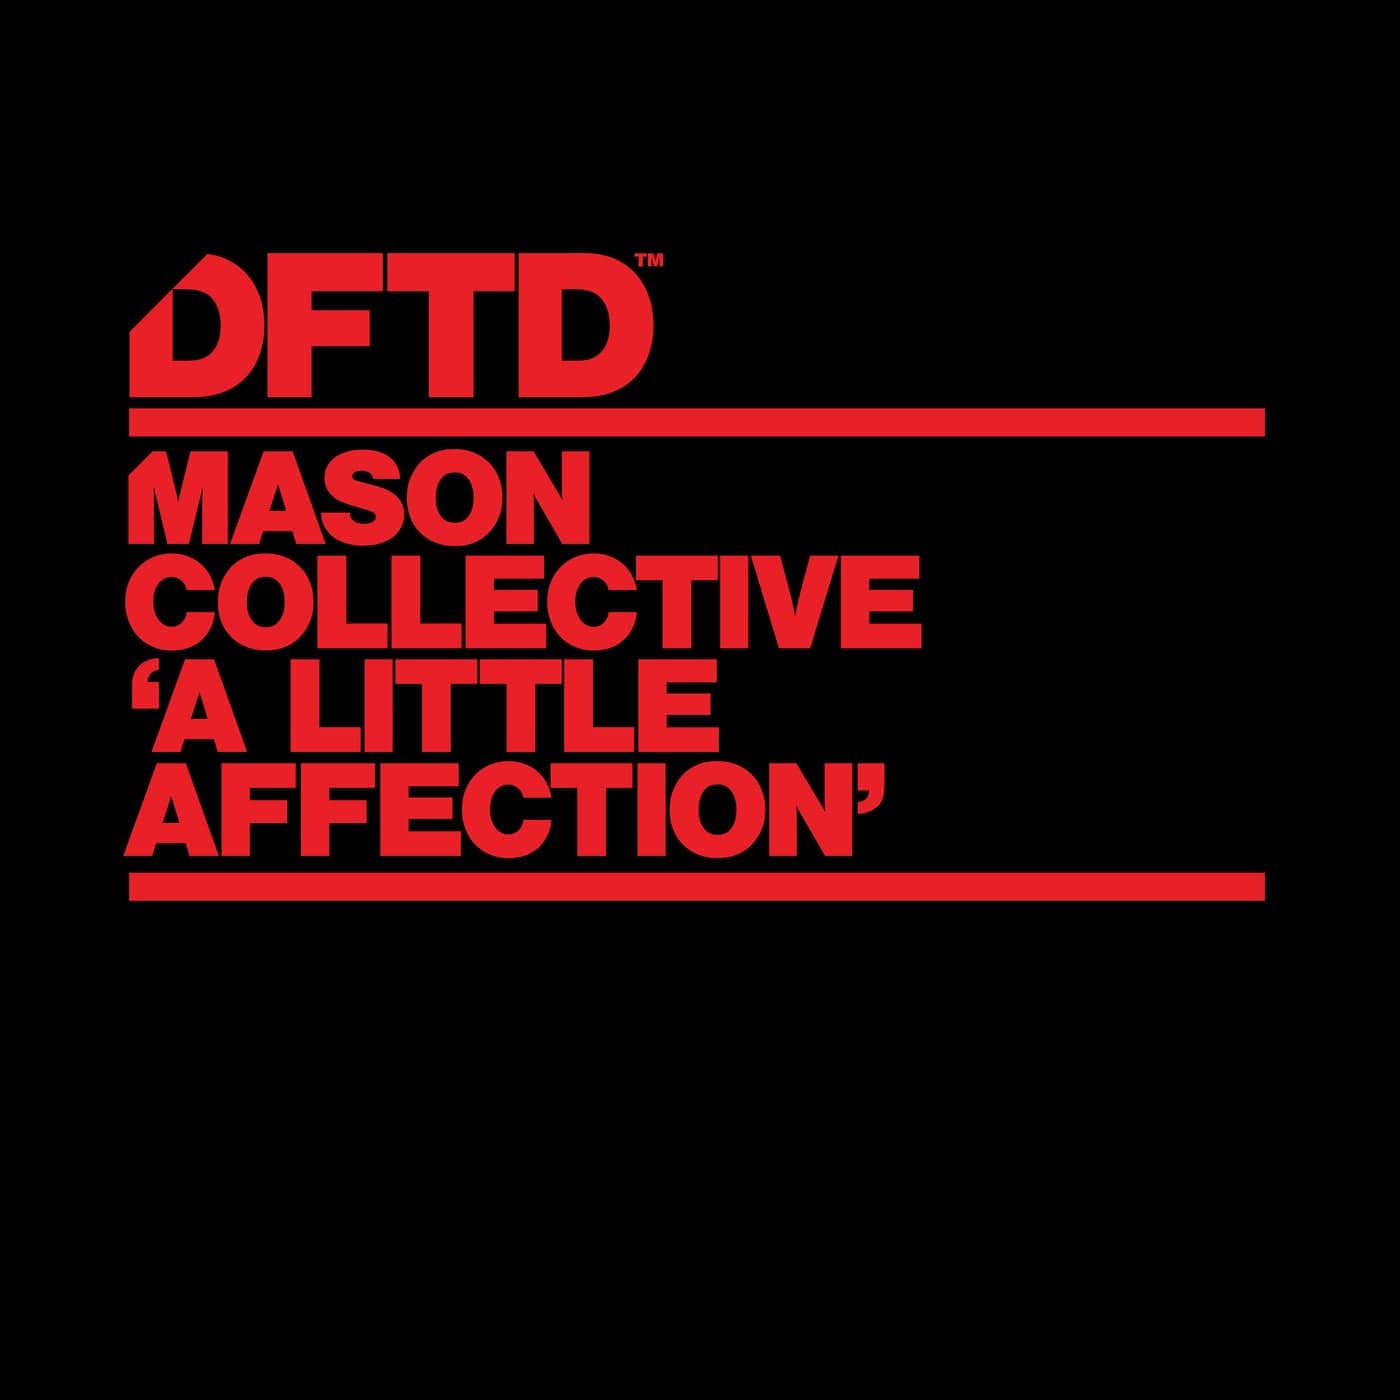 image cover: Mason Collective - A Little Affection / DFTDS169D3